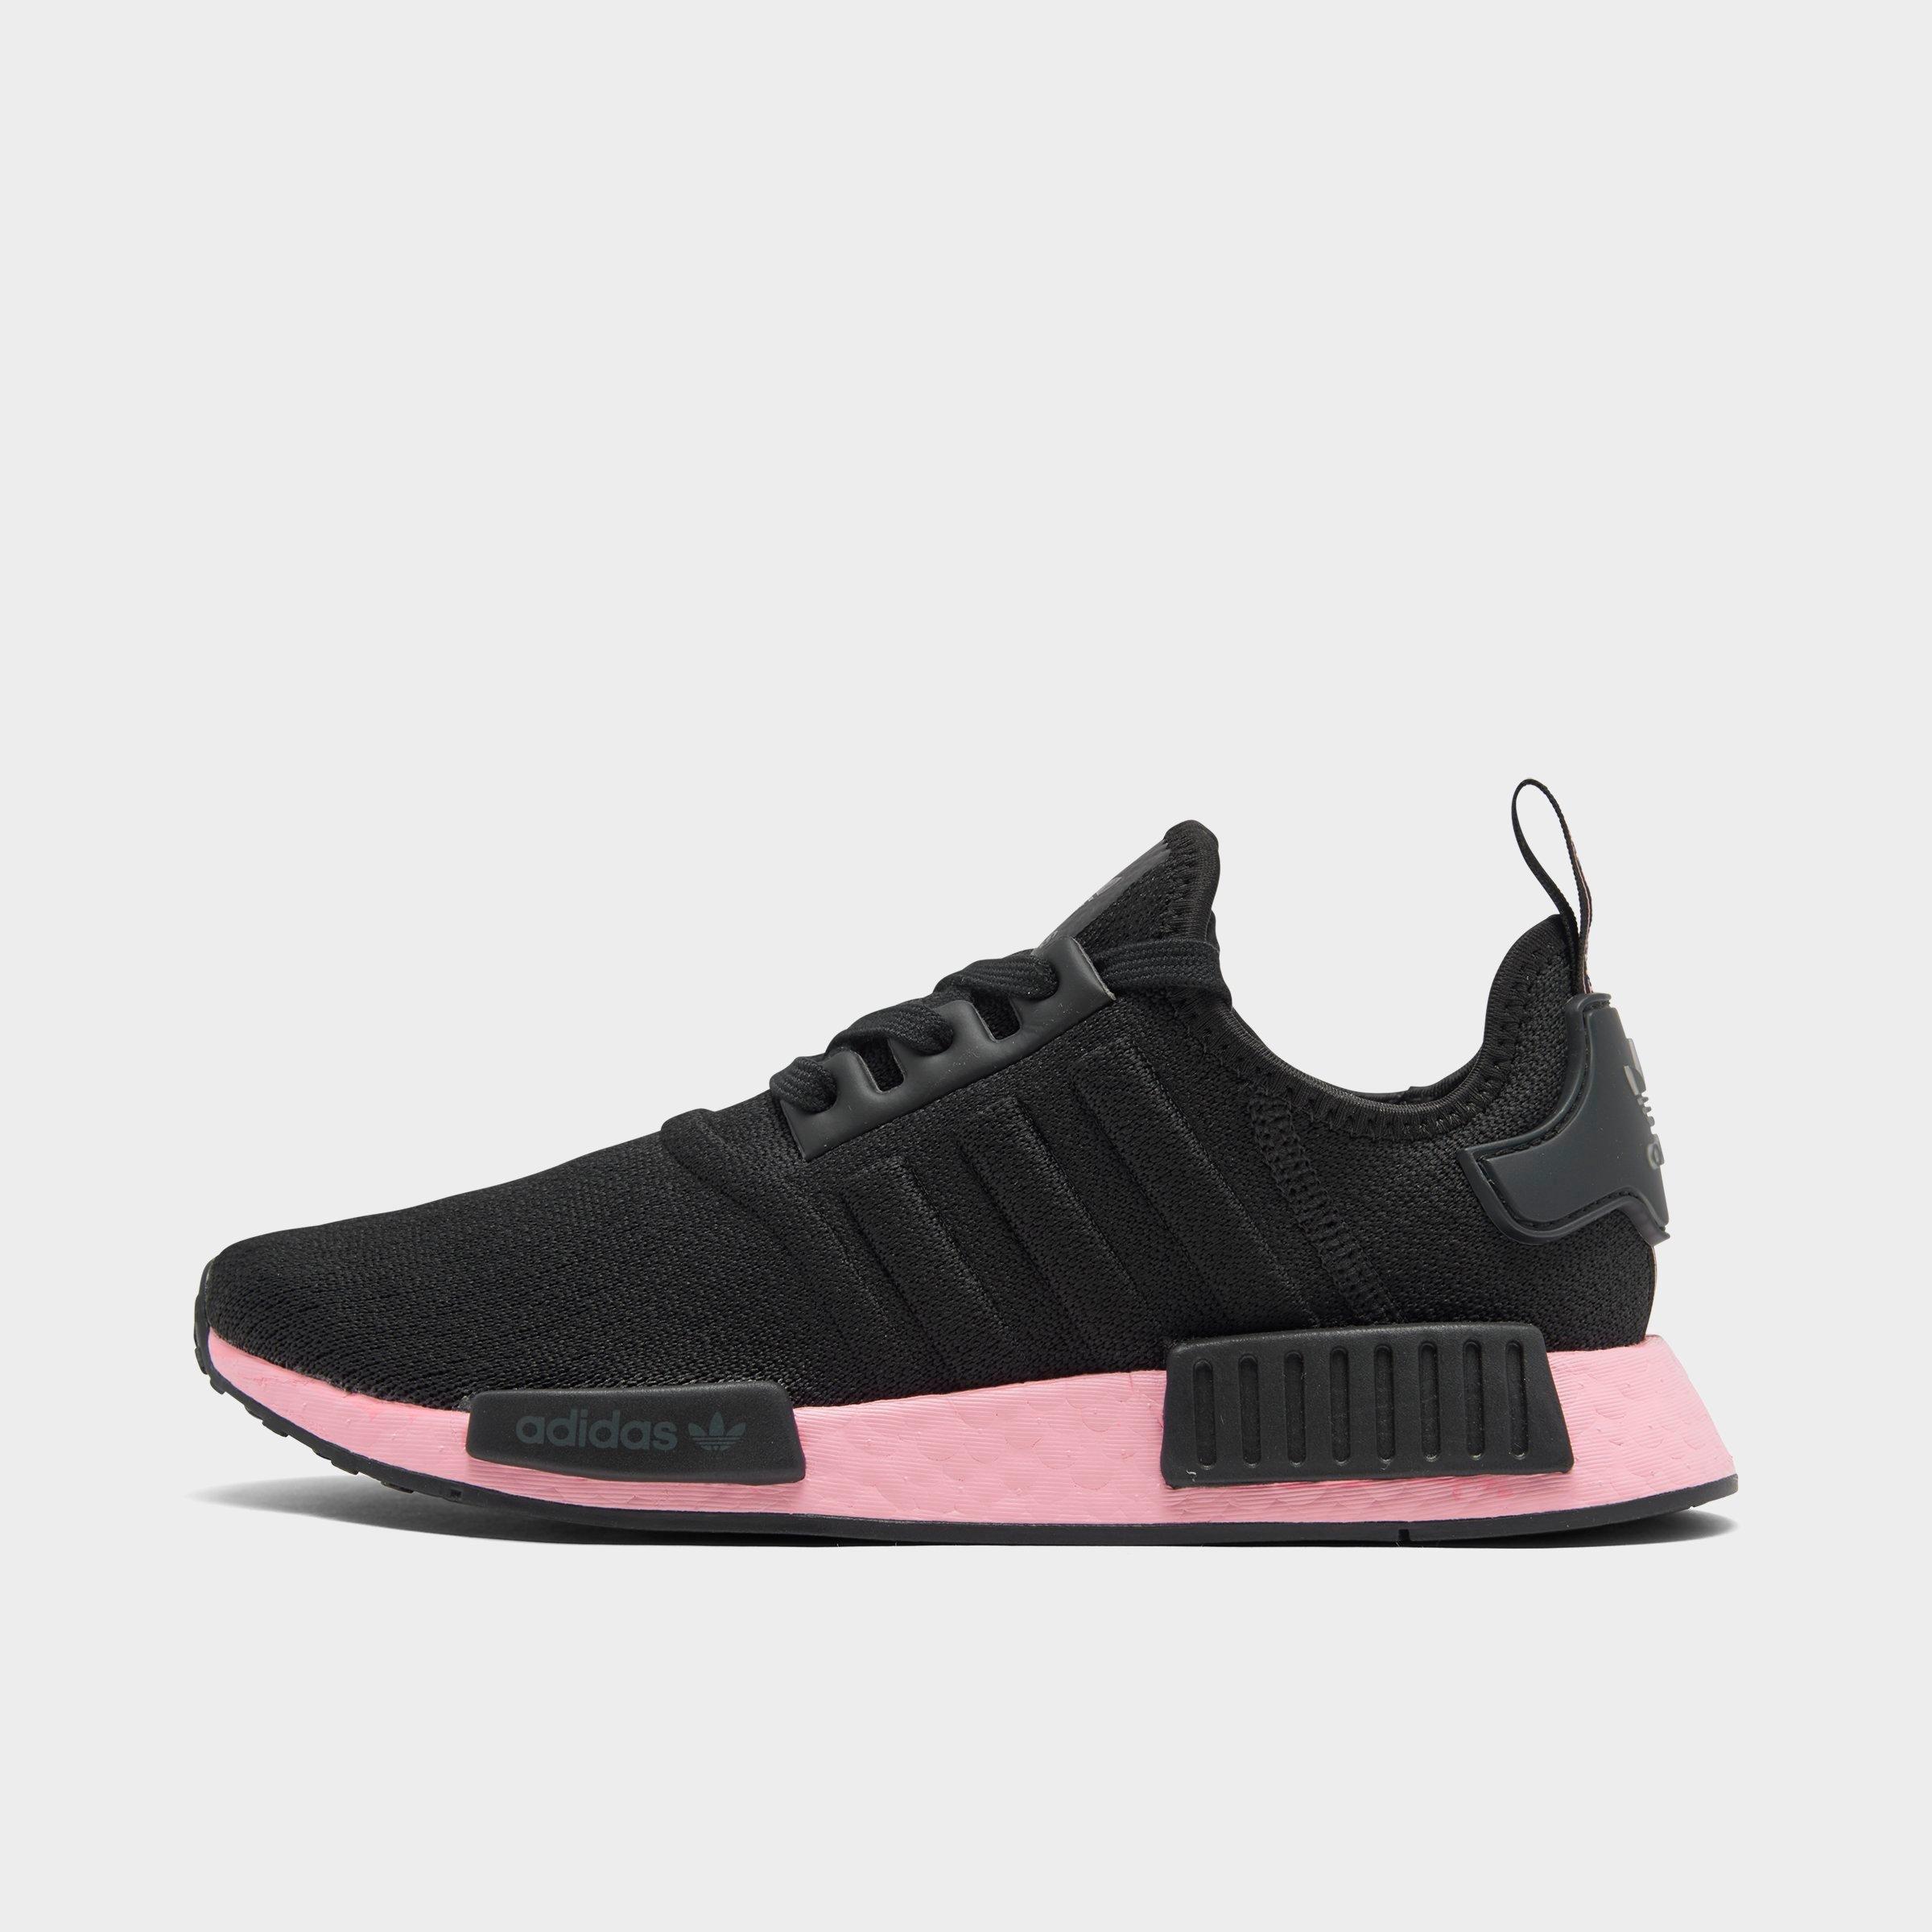 adidas nmd womens black and pink